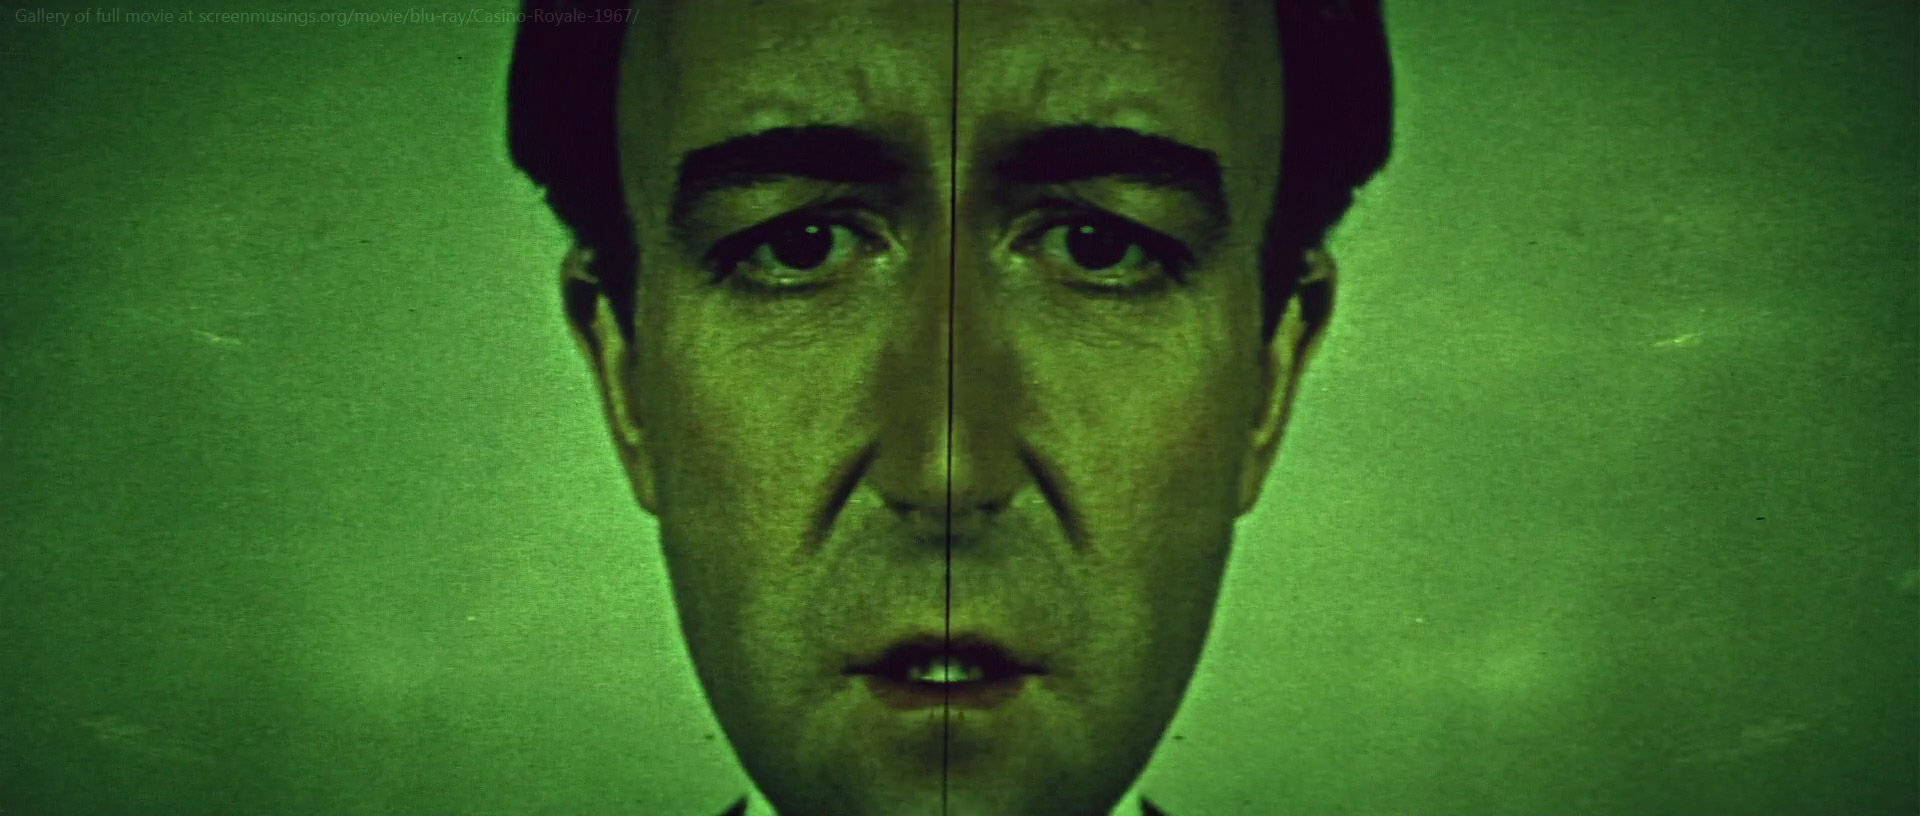 Peter Sellers, psychedelic imagery in Casino Royale